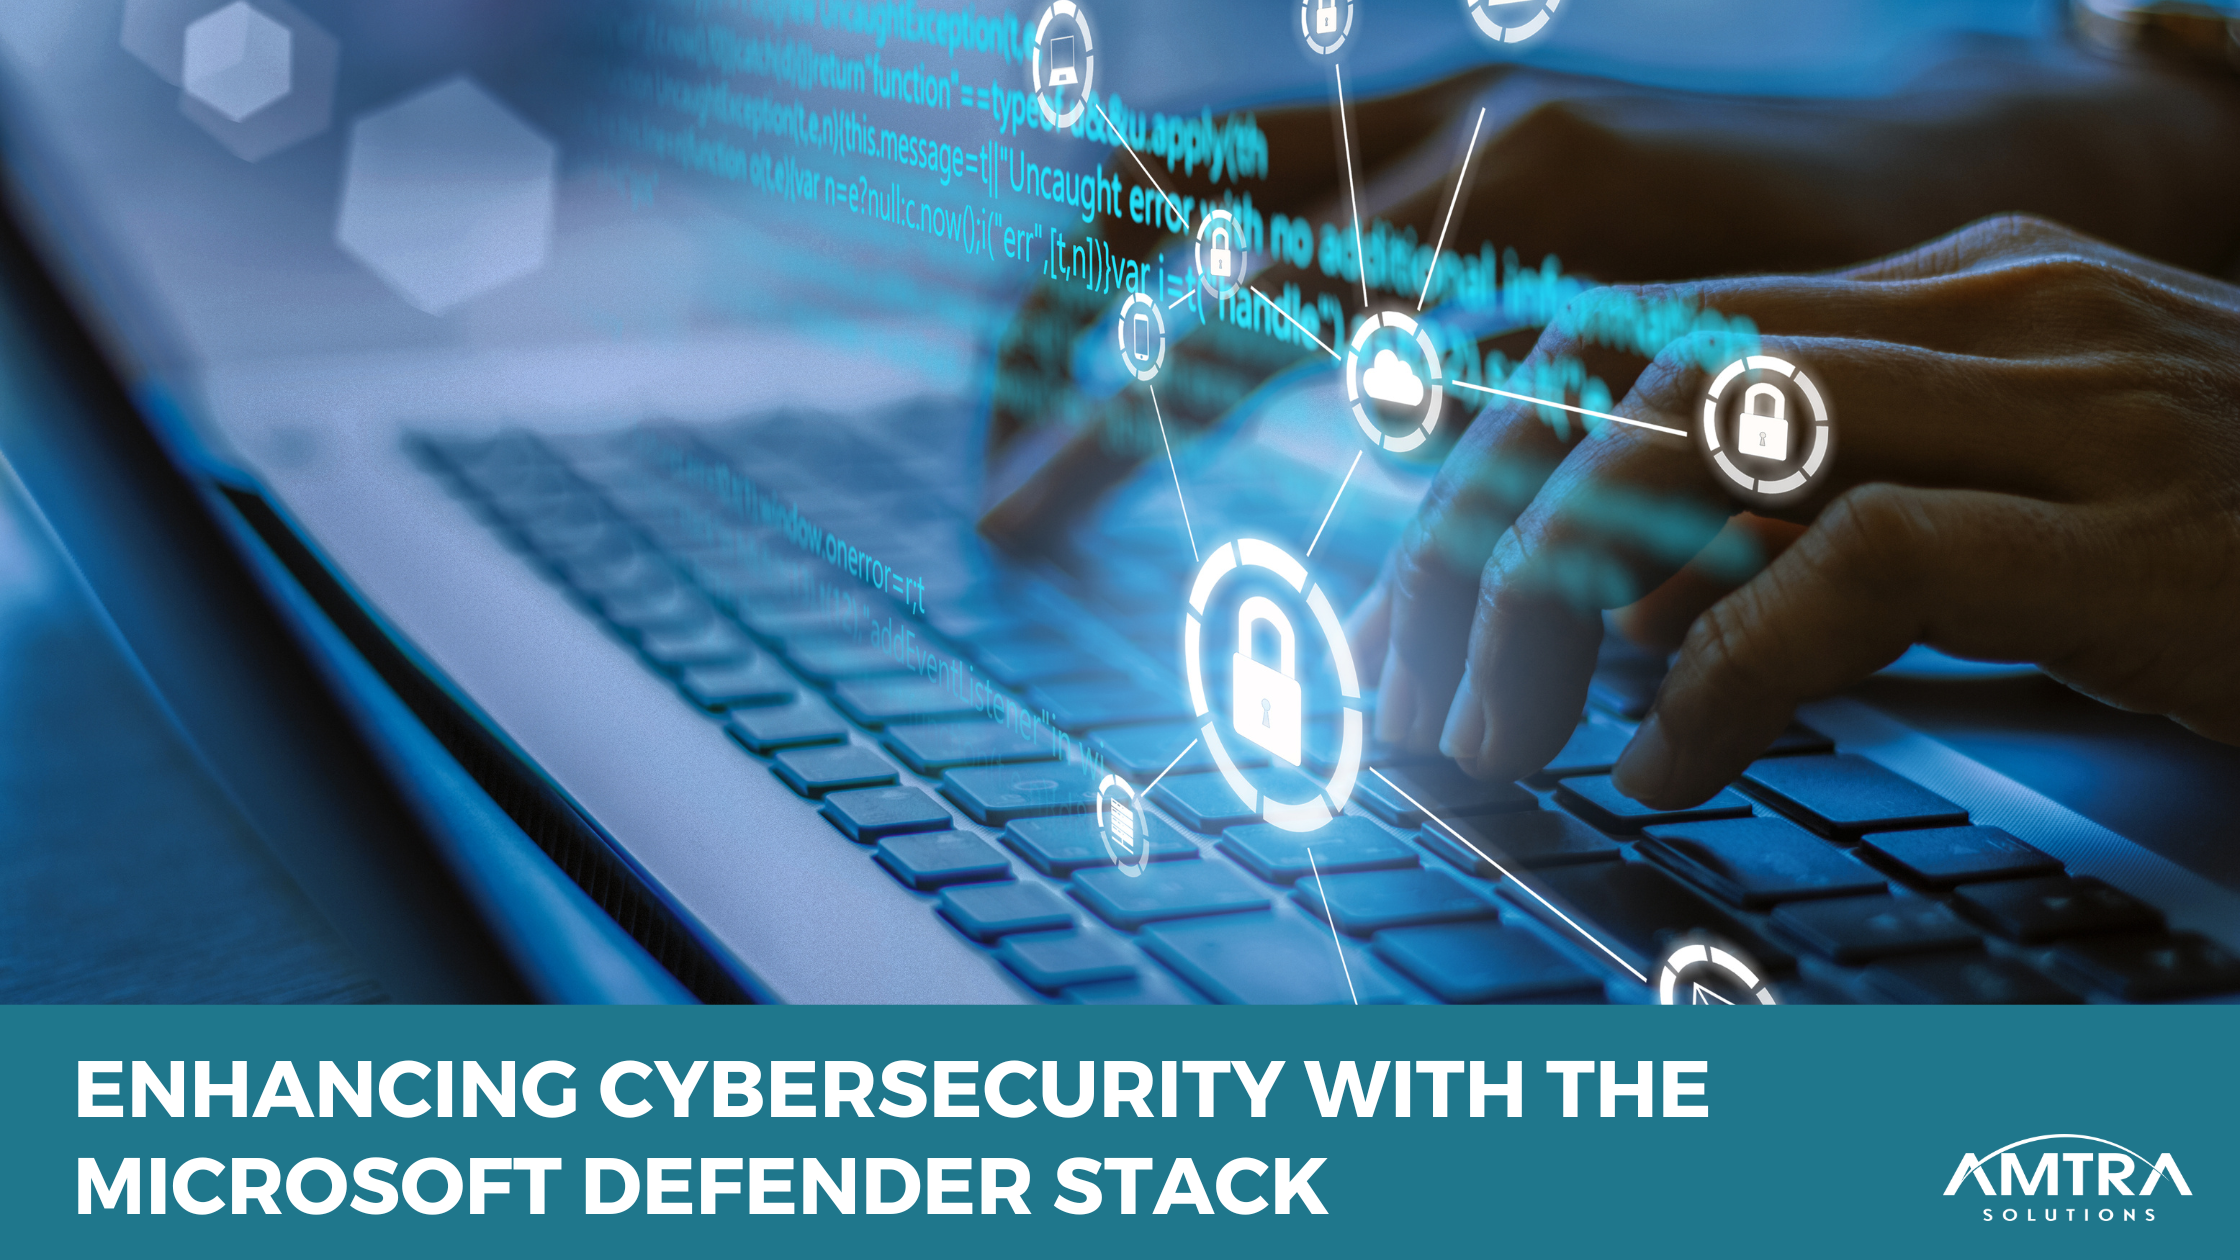 Enhancing Cybersecurity with the Microsoft Defender Stack